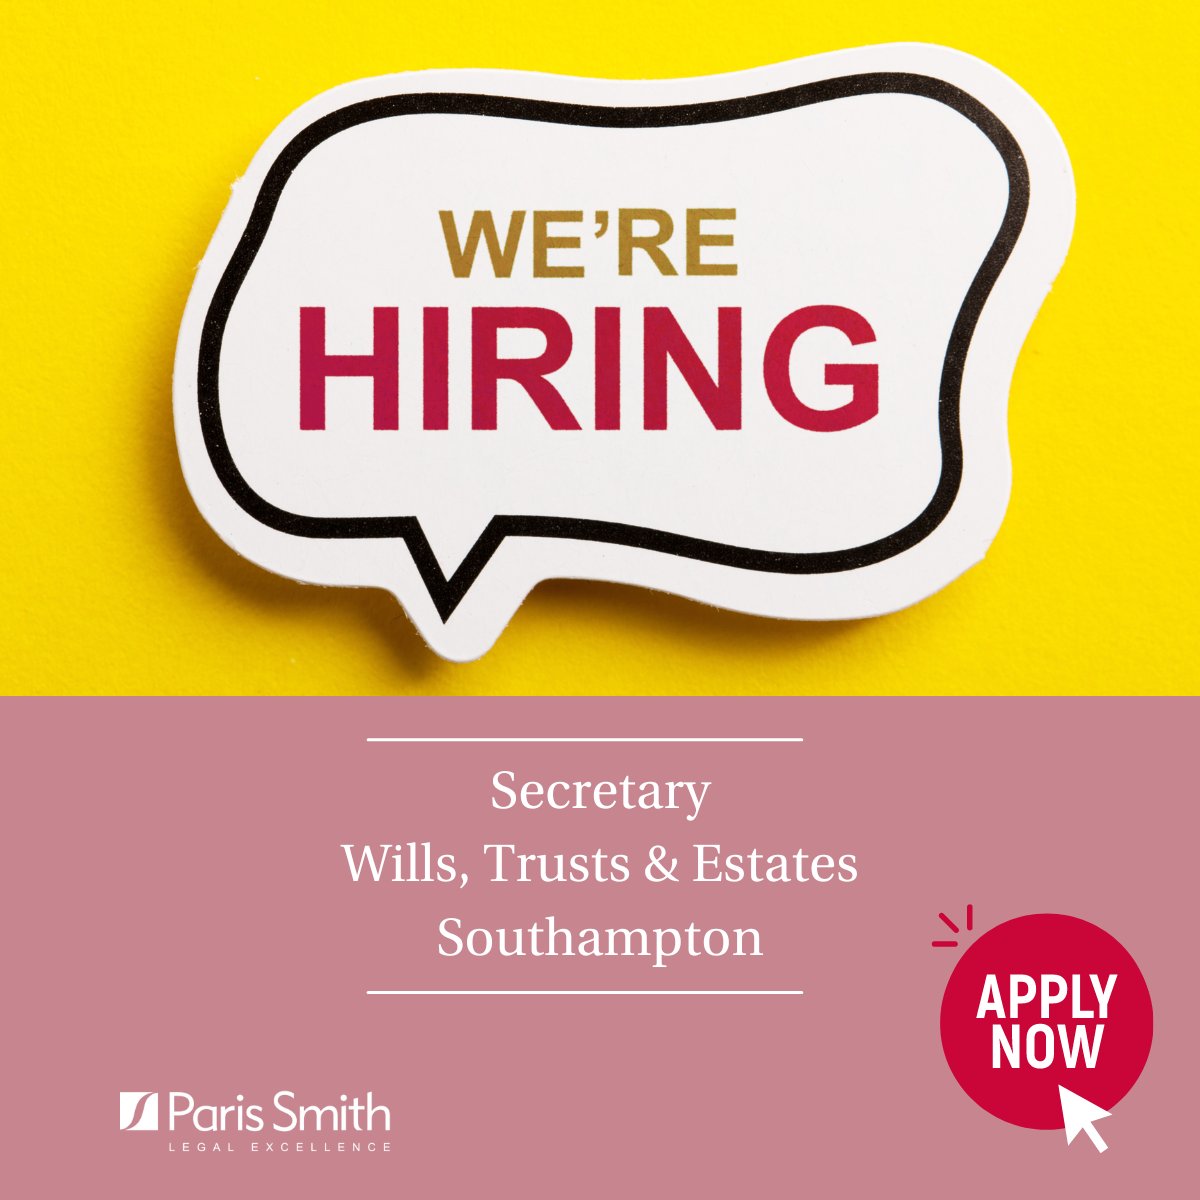 We are looking for a talented secretary for our Wills team. The ideal candidate will be an excellent communicator, highly organised, and have great IT skills. 

Apply now: parissmith.co.uk/career/secreta…  

#hiring #southamptonjobs